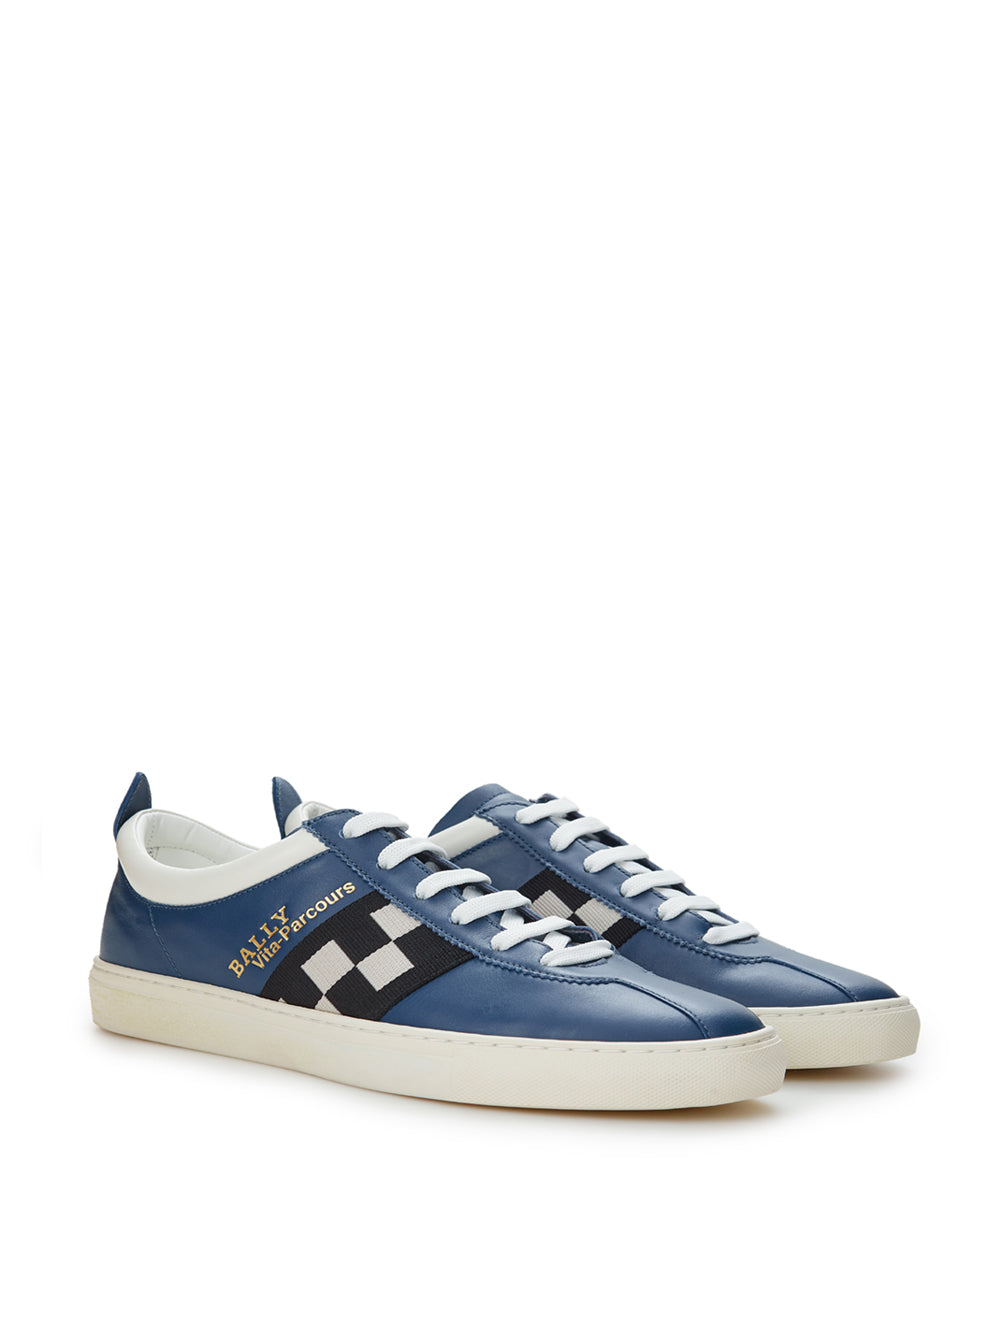 Vita-Parcours Sneakers in Bally Blue Leather